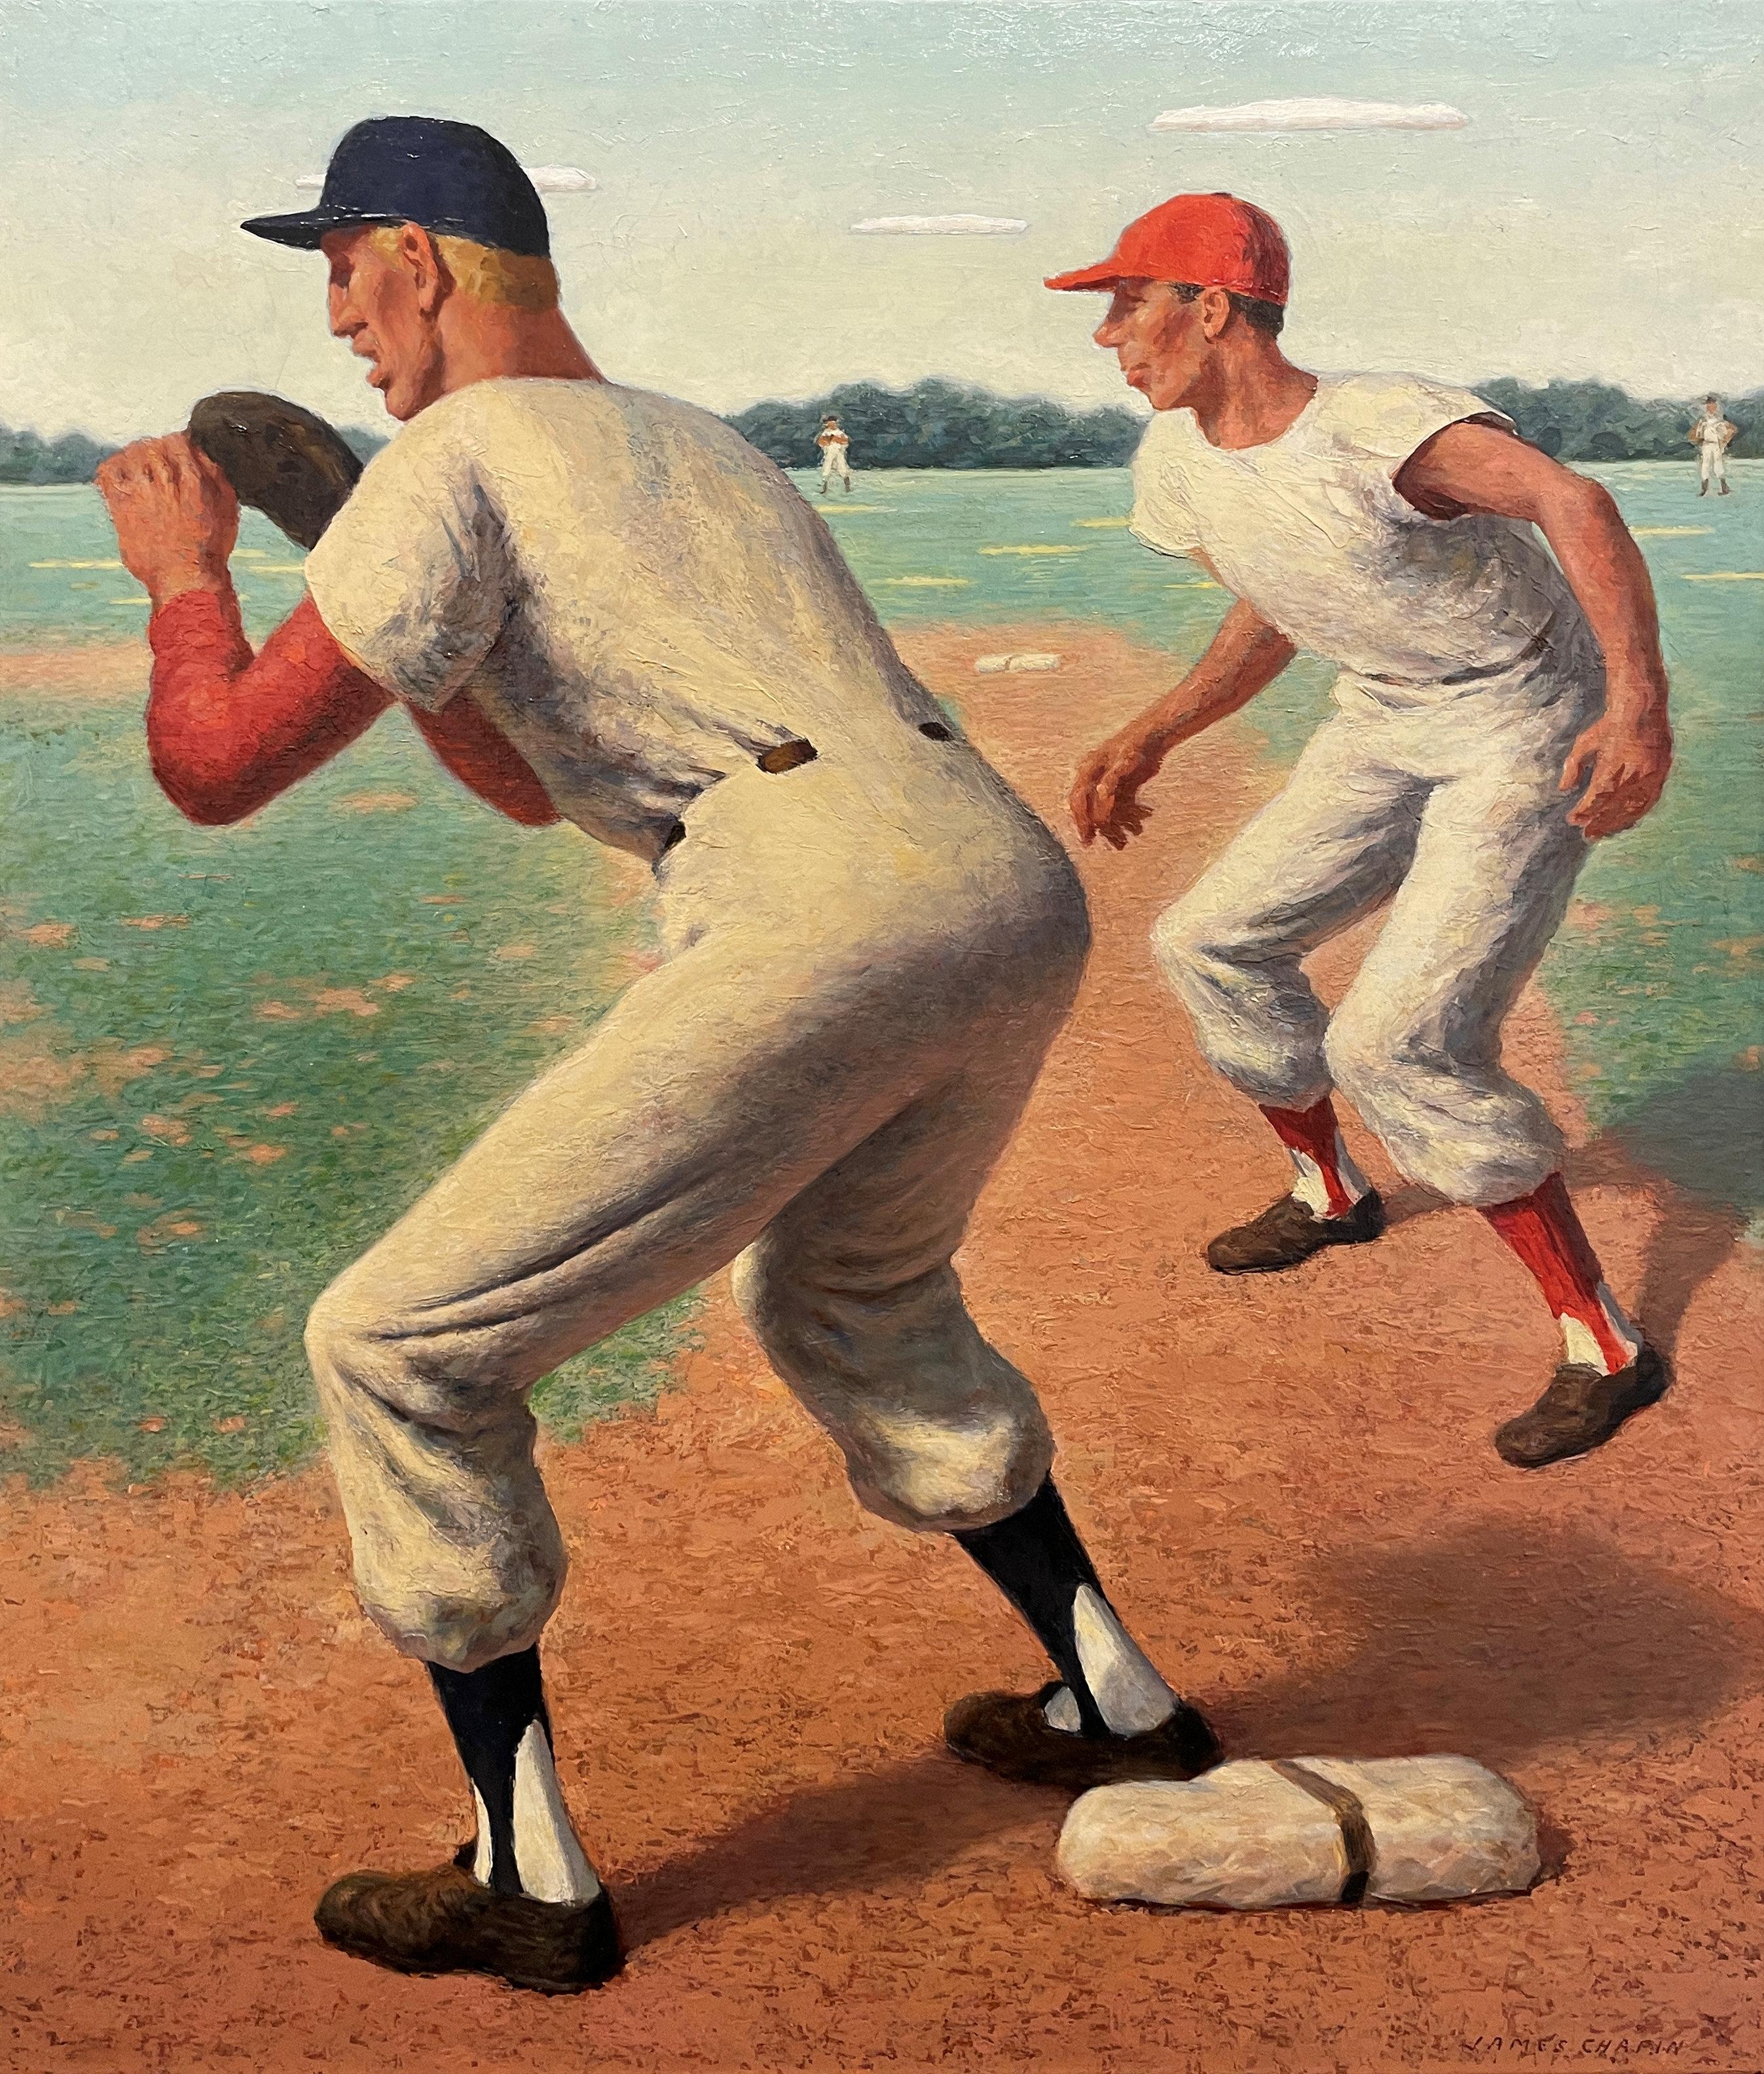 JAMES CHAPIN Figurative Painting - "Man on First" James Chapin, Baseball Sports, Figurative WPA, American Scene